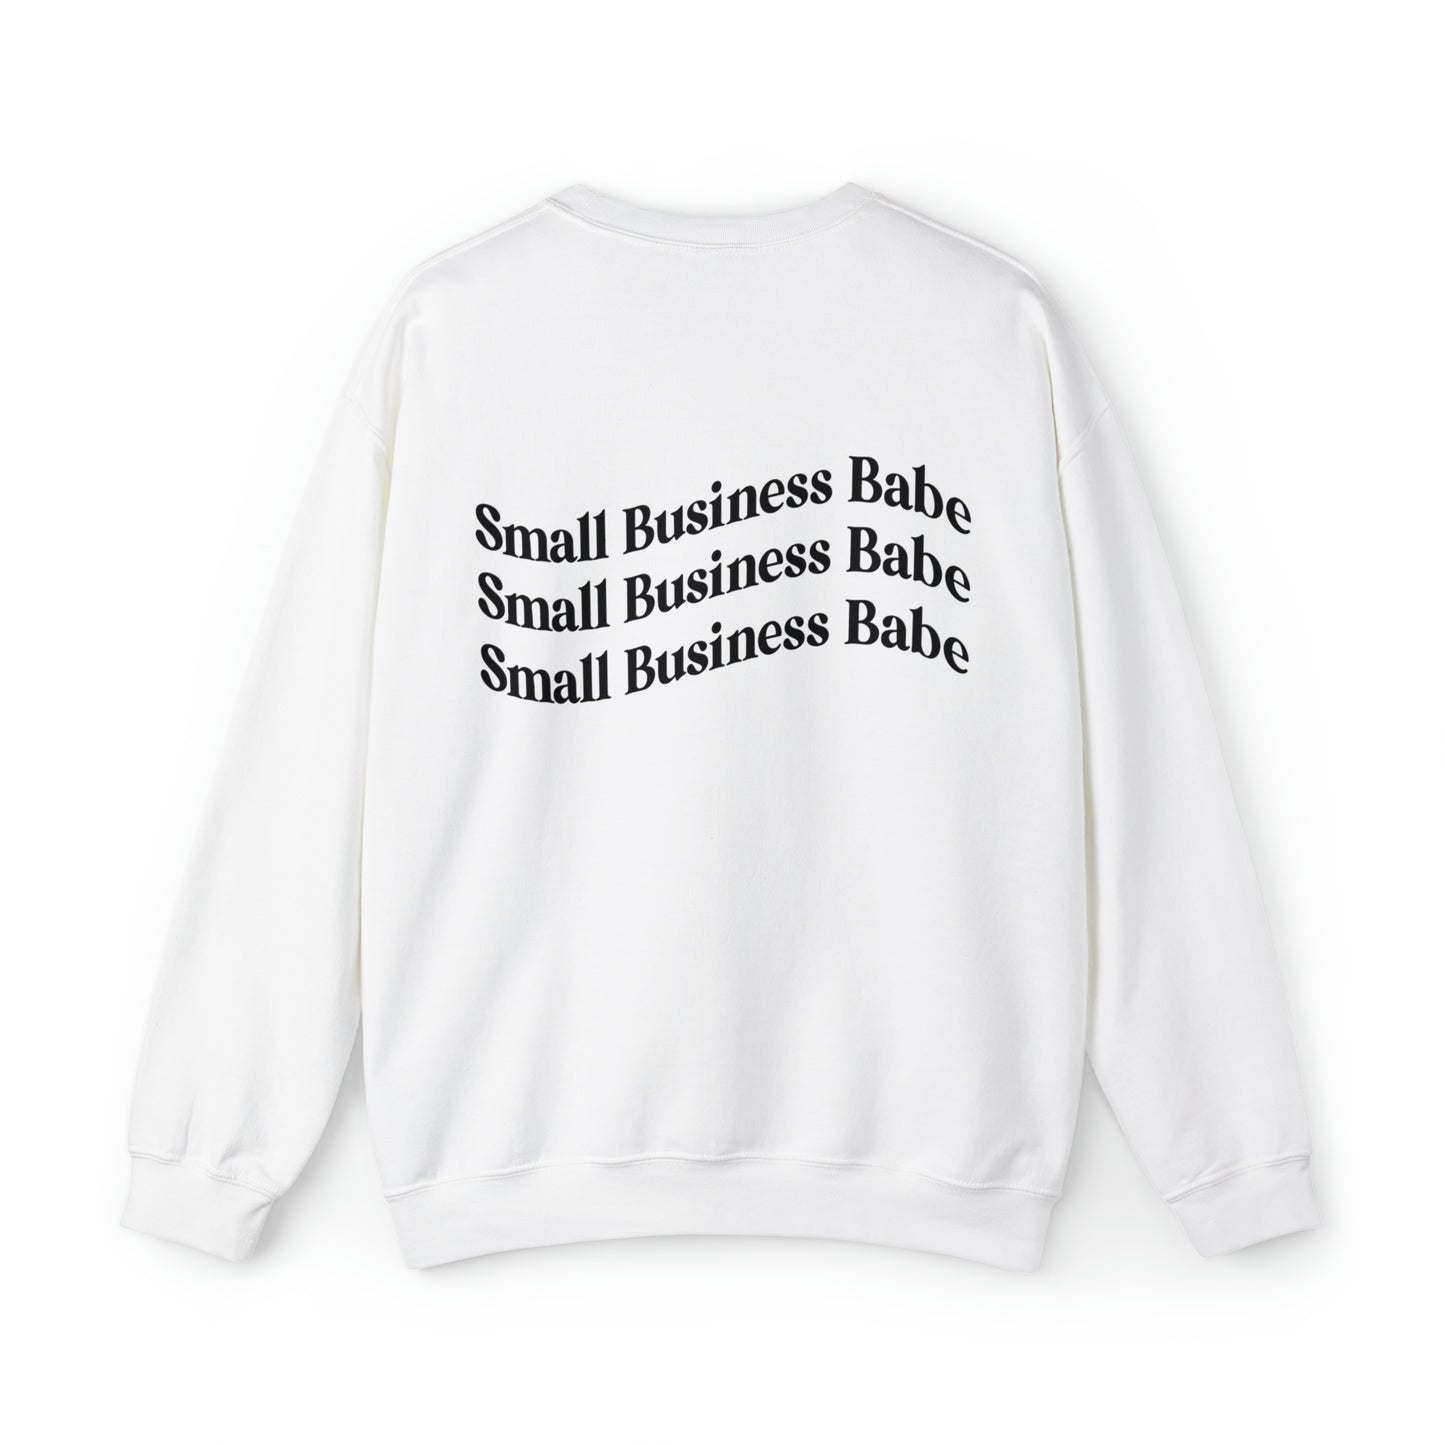 Small Business Babe Crew